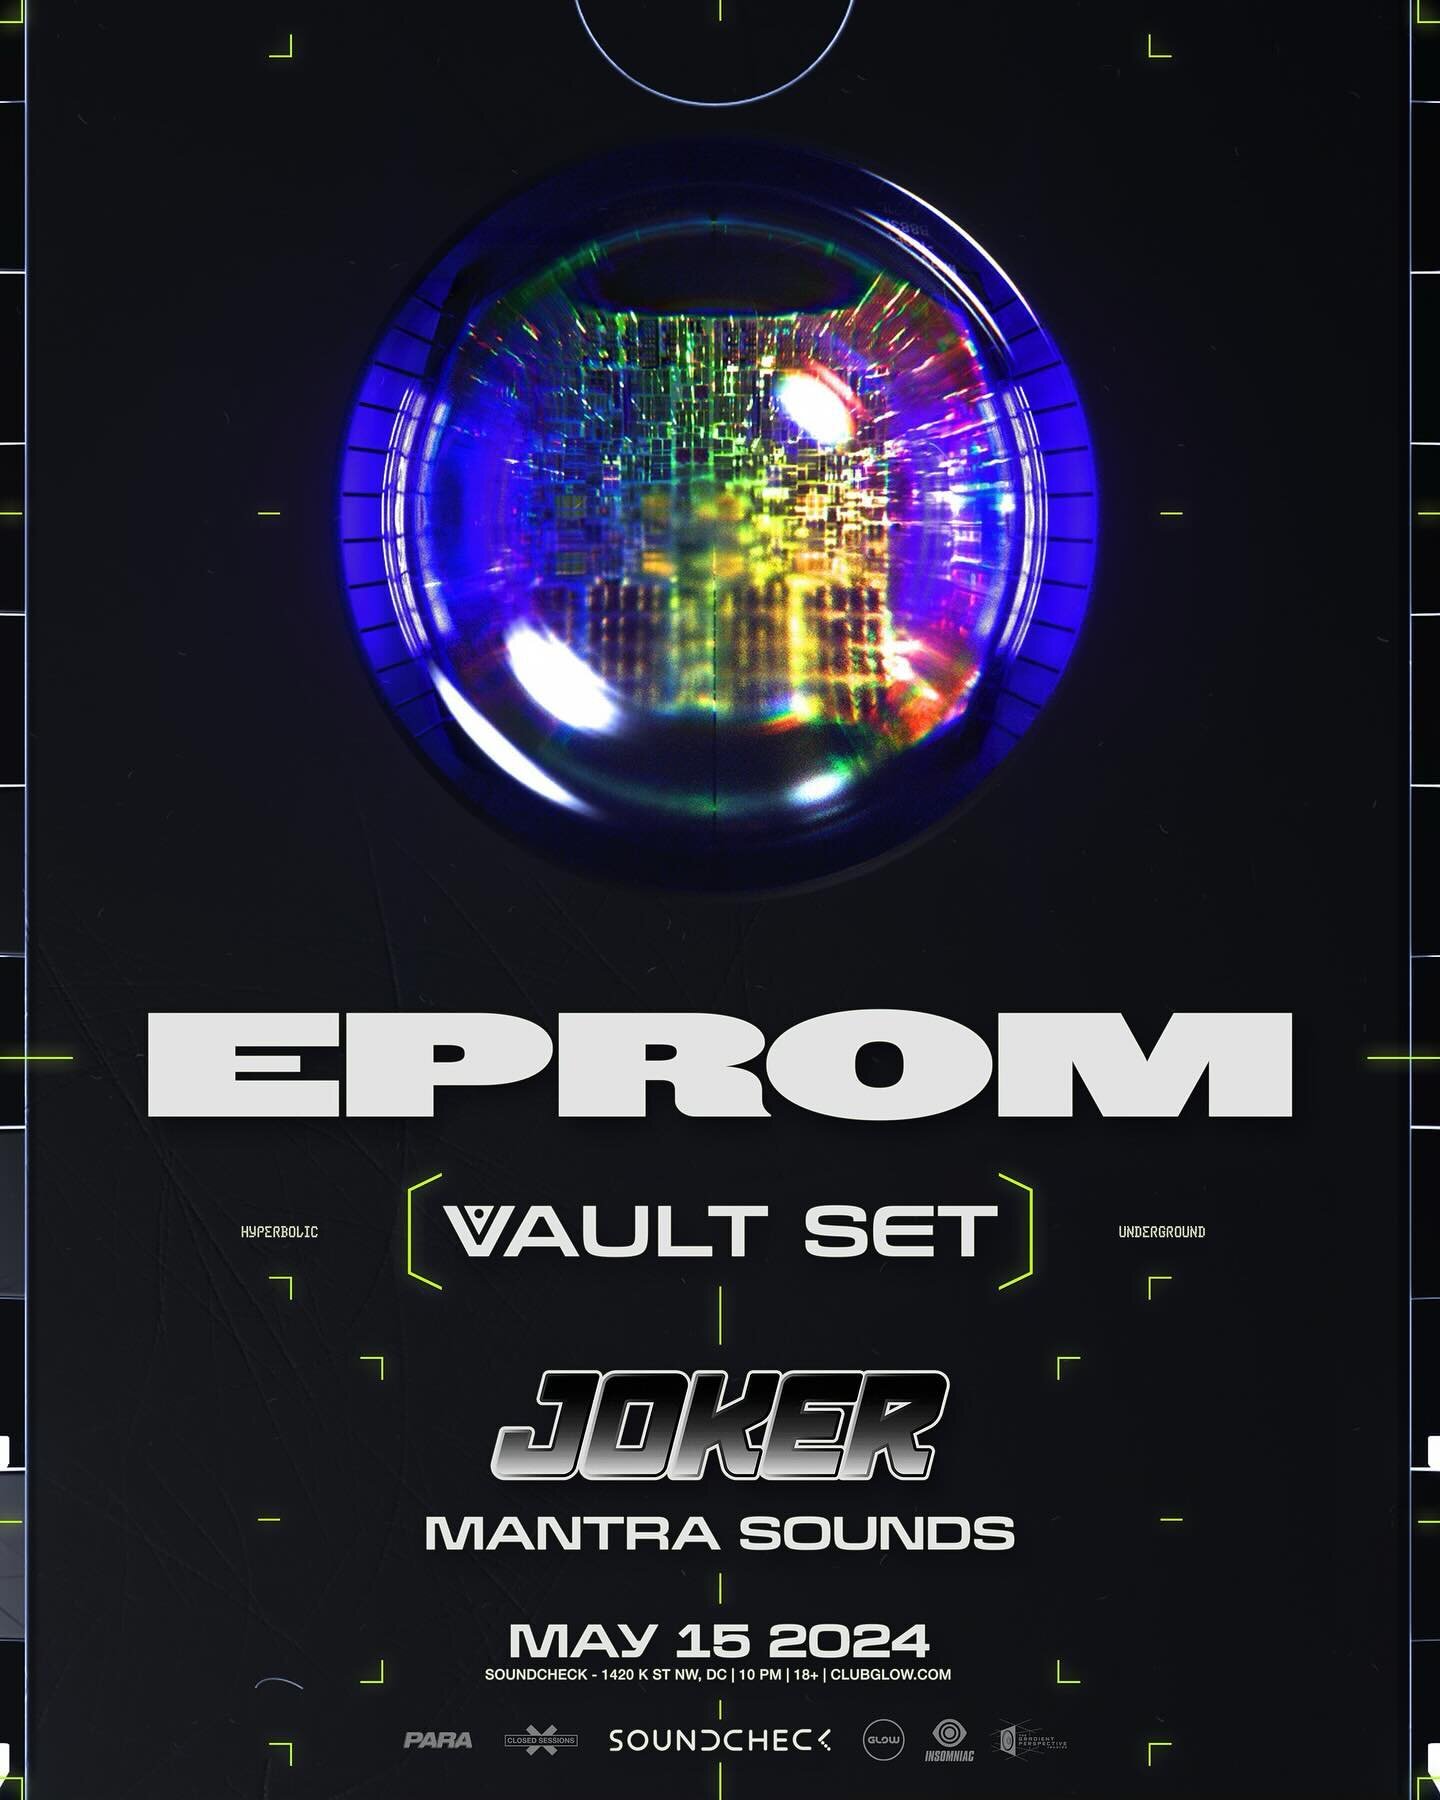 ANNOUNCED &amp; ON SALE ➡️

@eprombeats (Vault Set)
in DC at @soundcheckdc on May 15 with @joker_kapsize and @mantrasounds 

&amp; in Brooklyn at @superioringredients on May 18 with @ternionsound, @huxley_anne_ , and @mantrasounds 

Grab your tickets